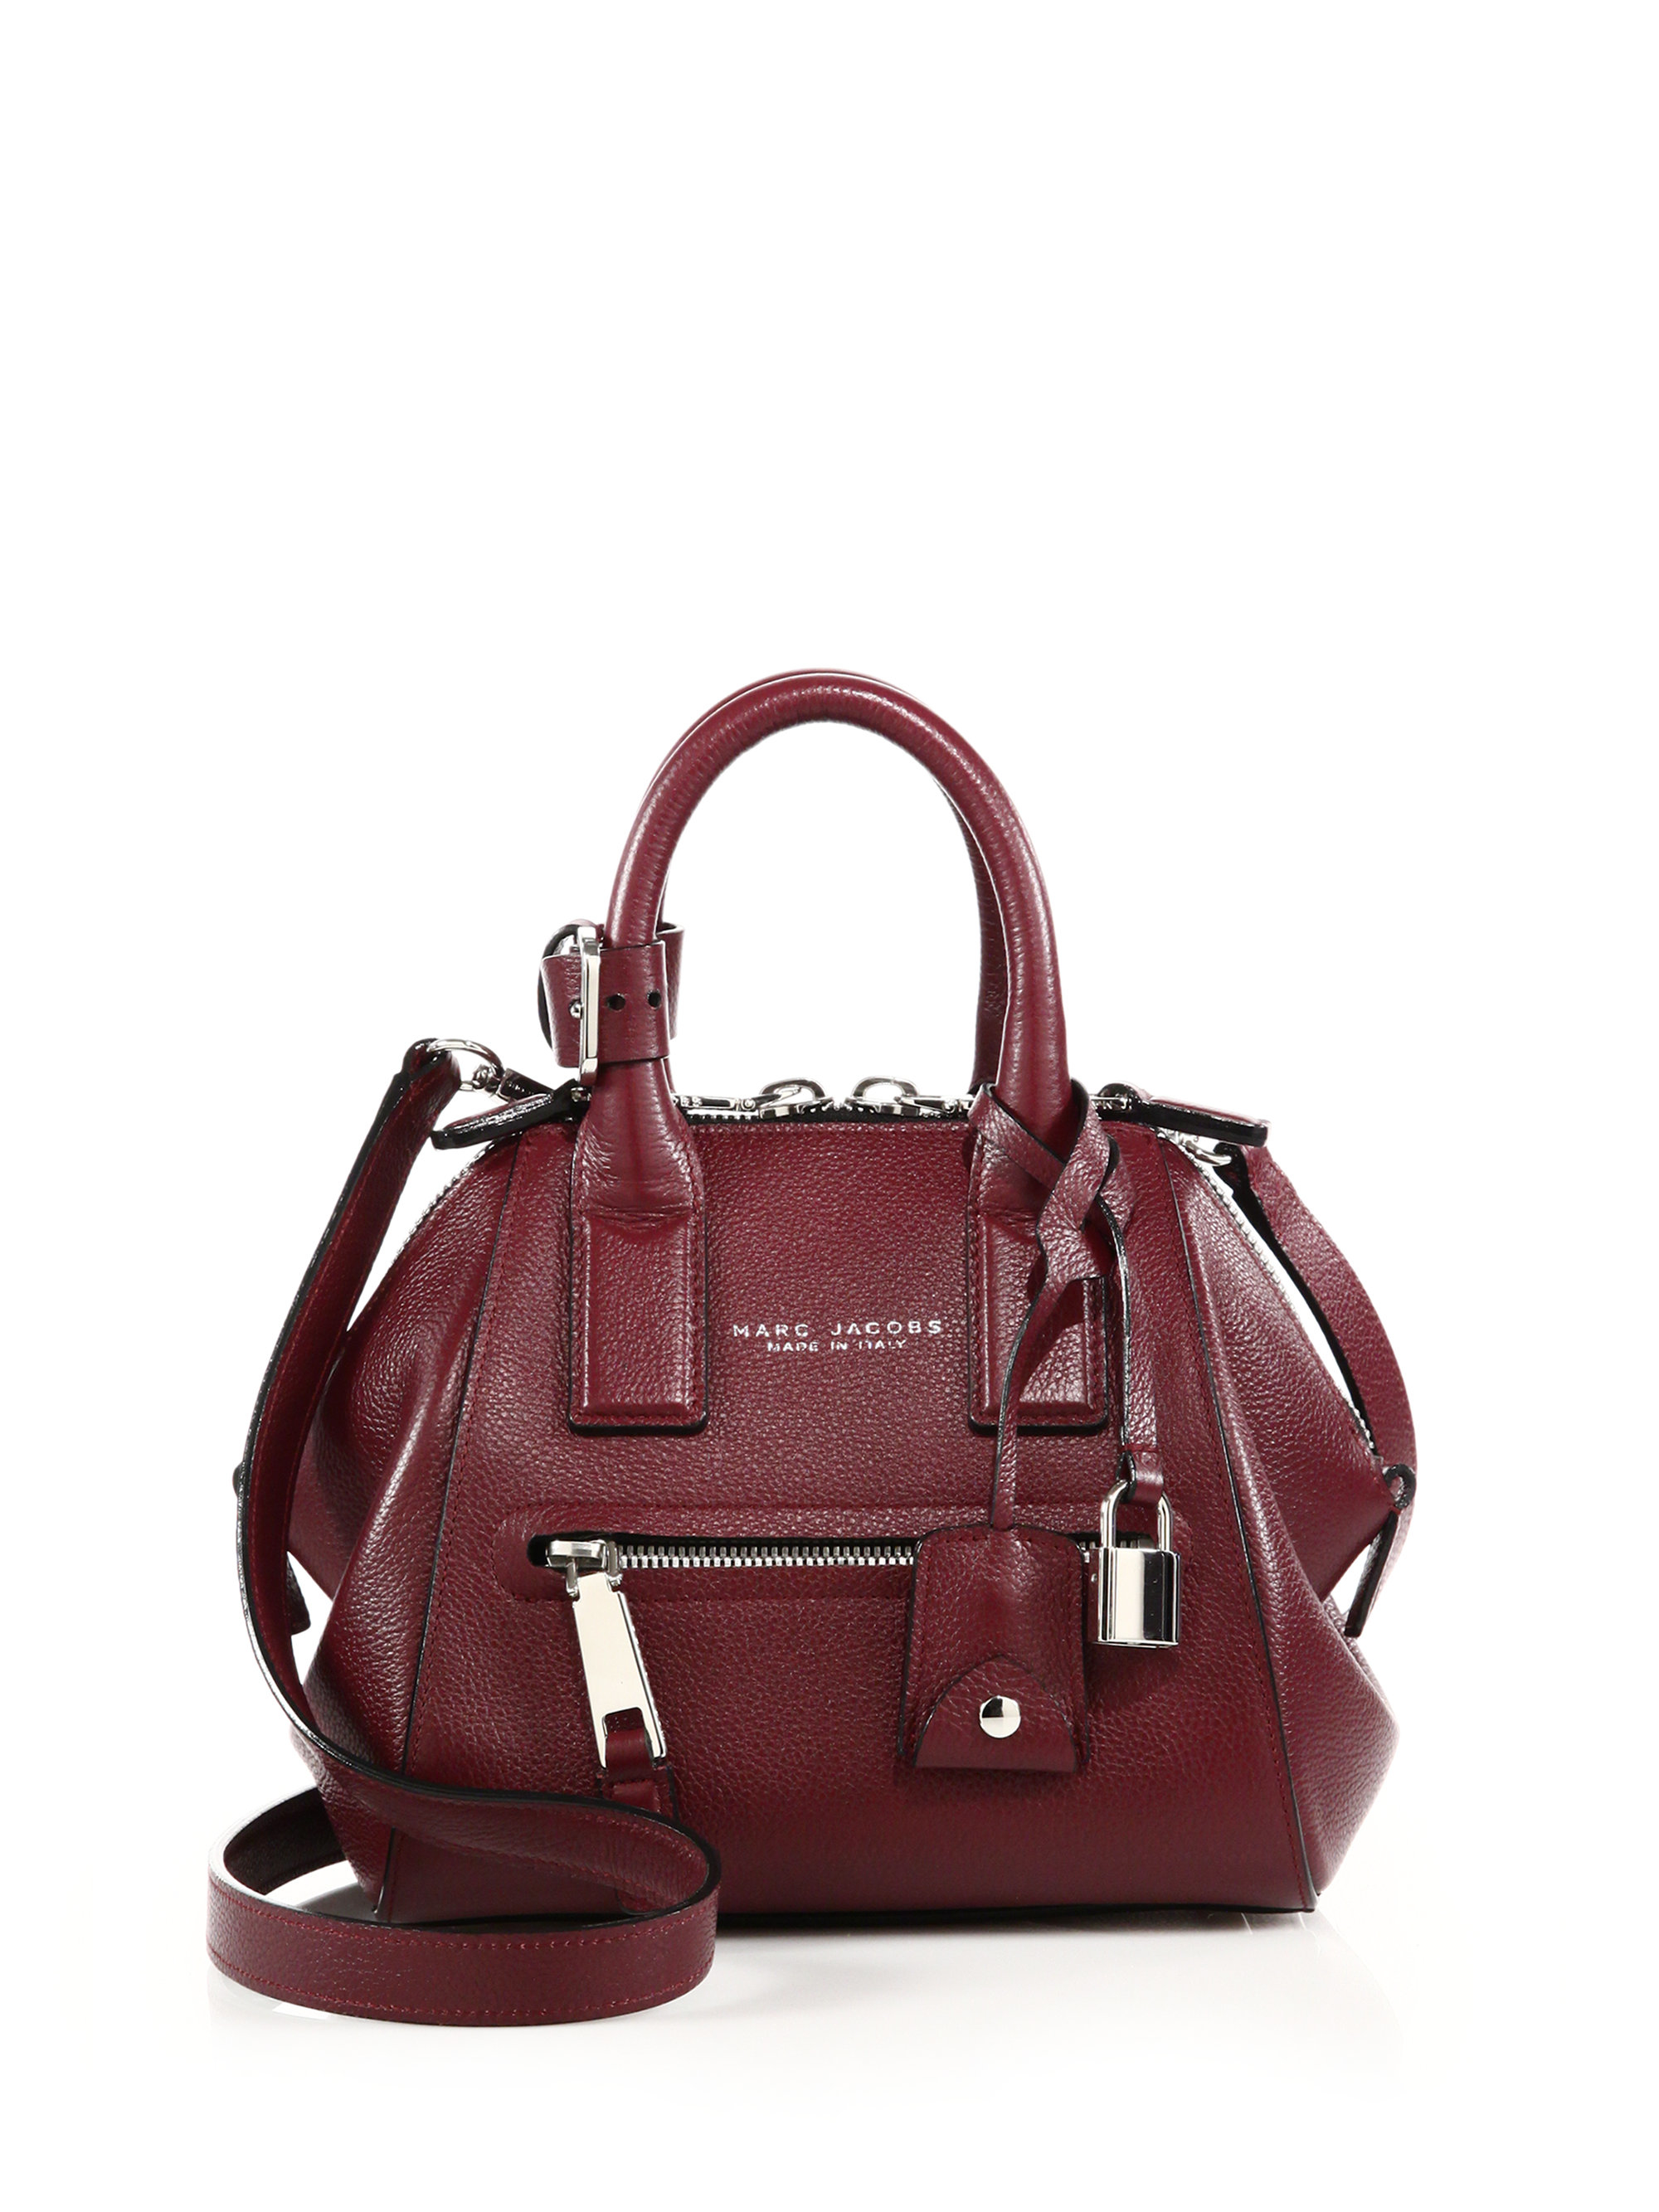 Marc Jacobs Incognito Mini Textured Leather Top-handle Bag in Purple - Lyst